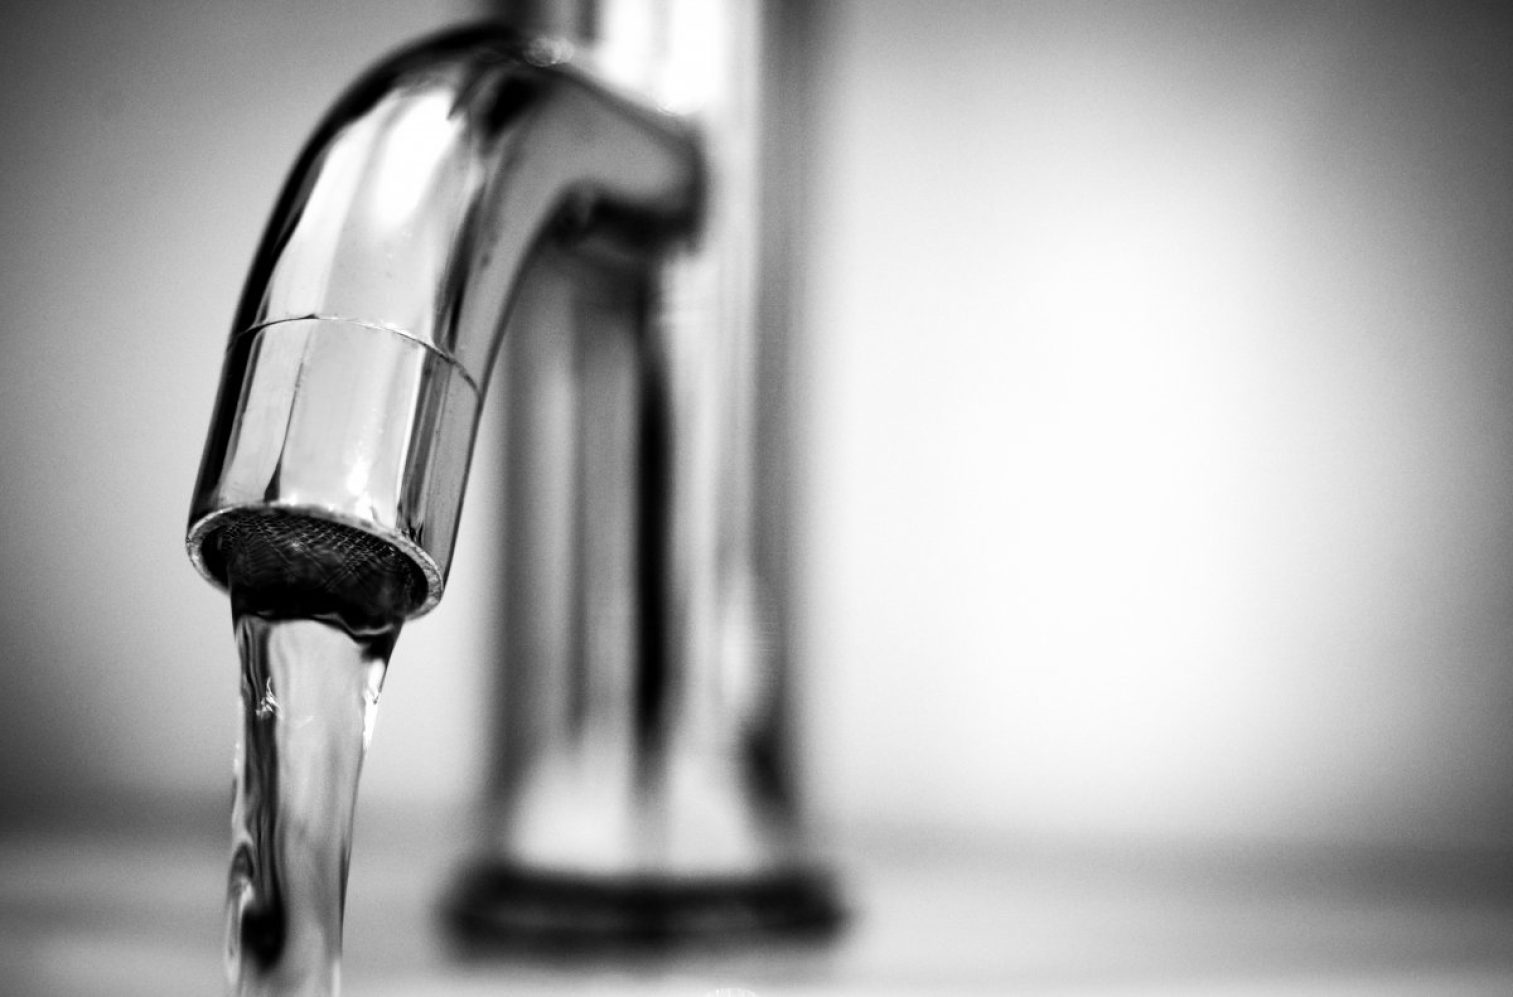 water, tap, black and white